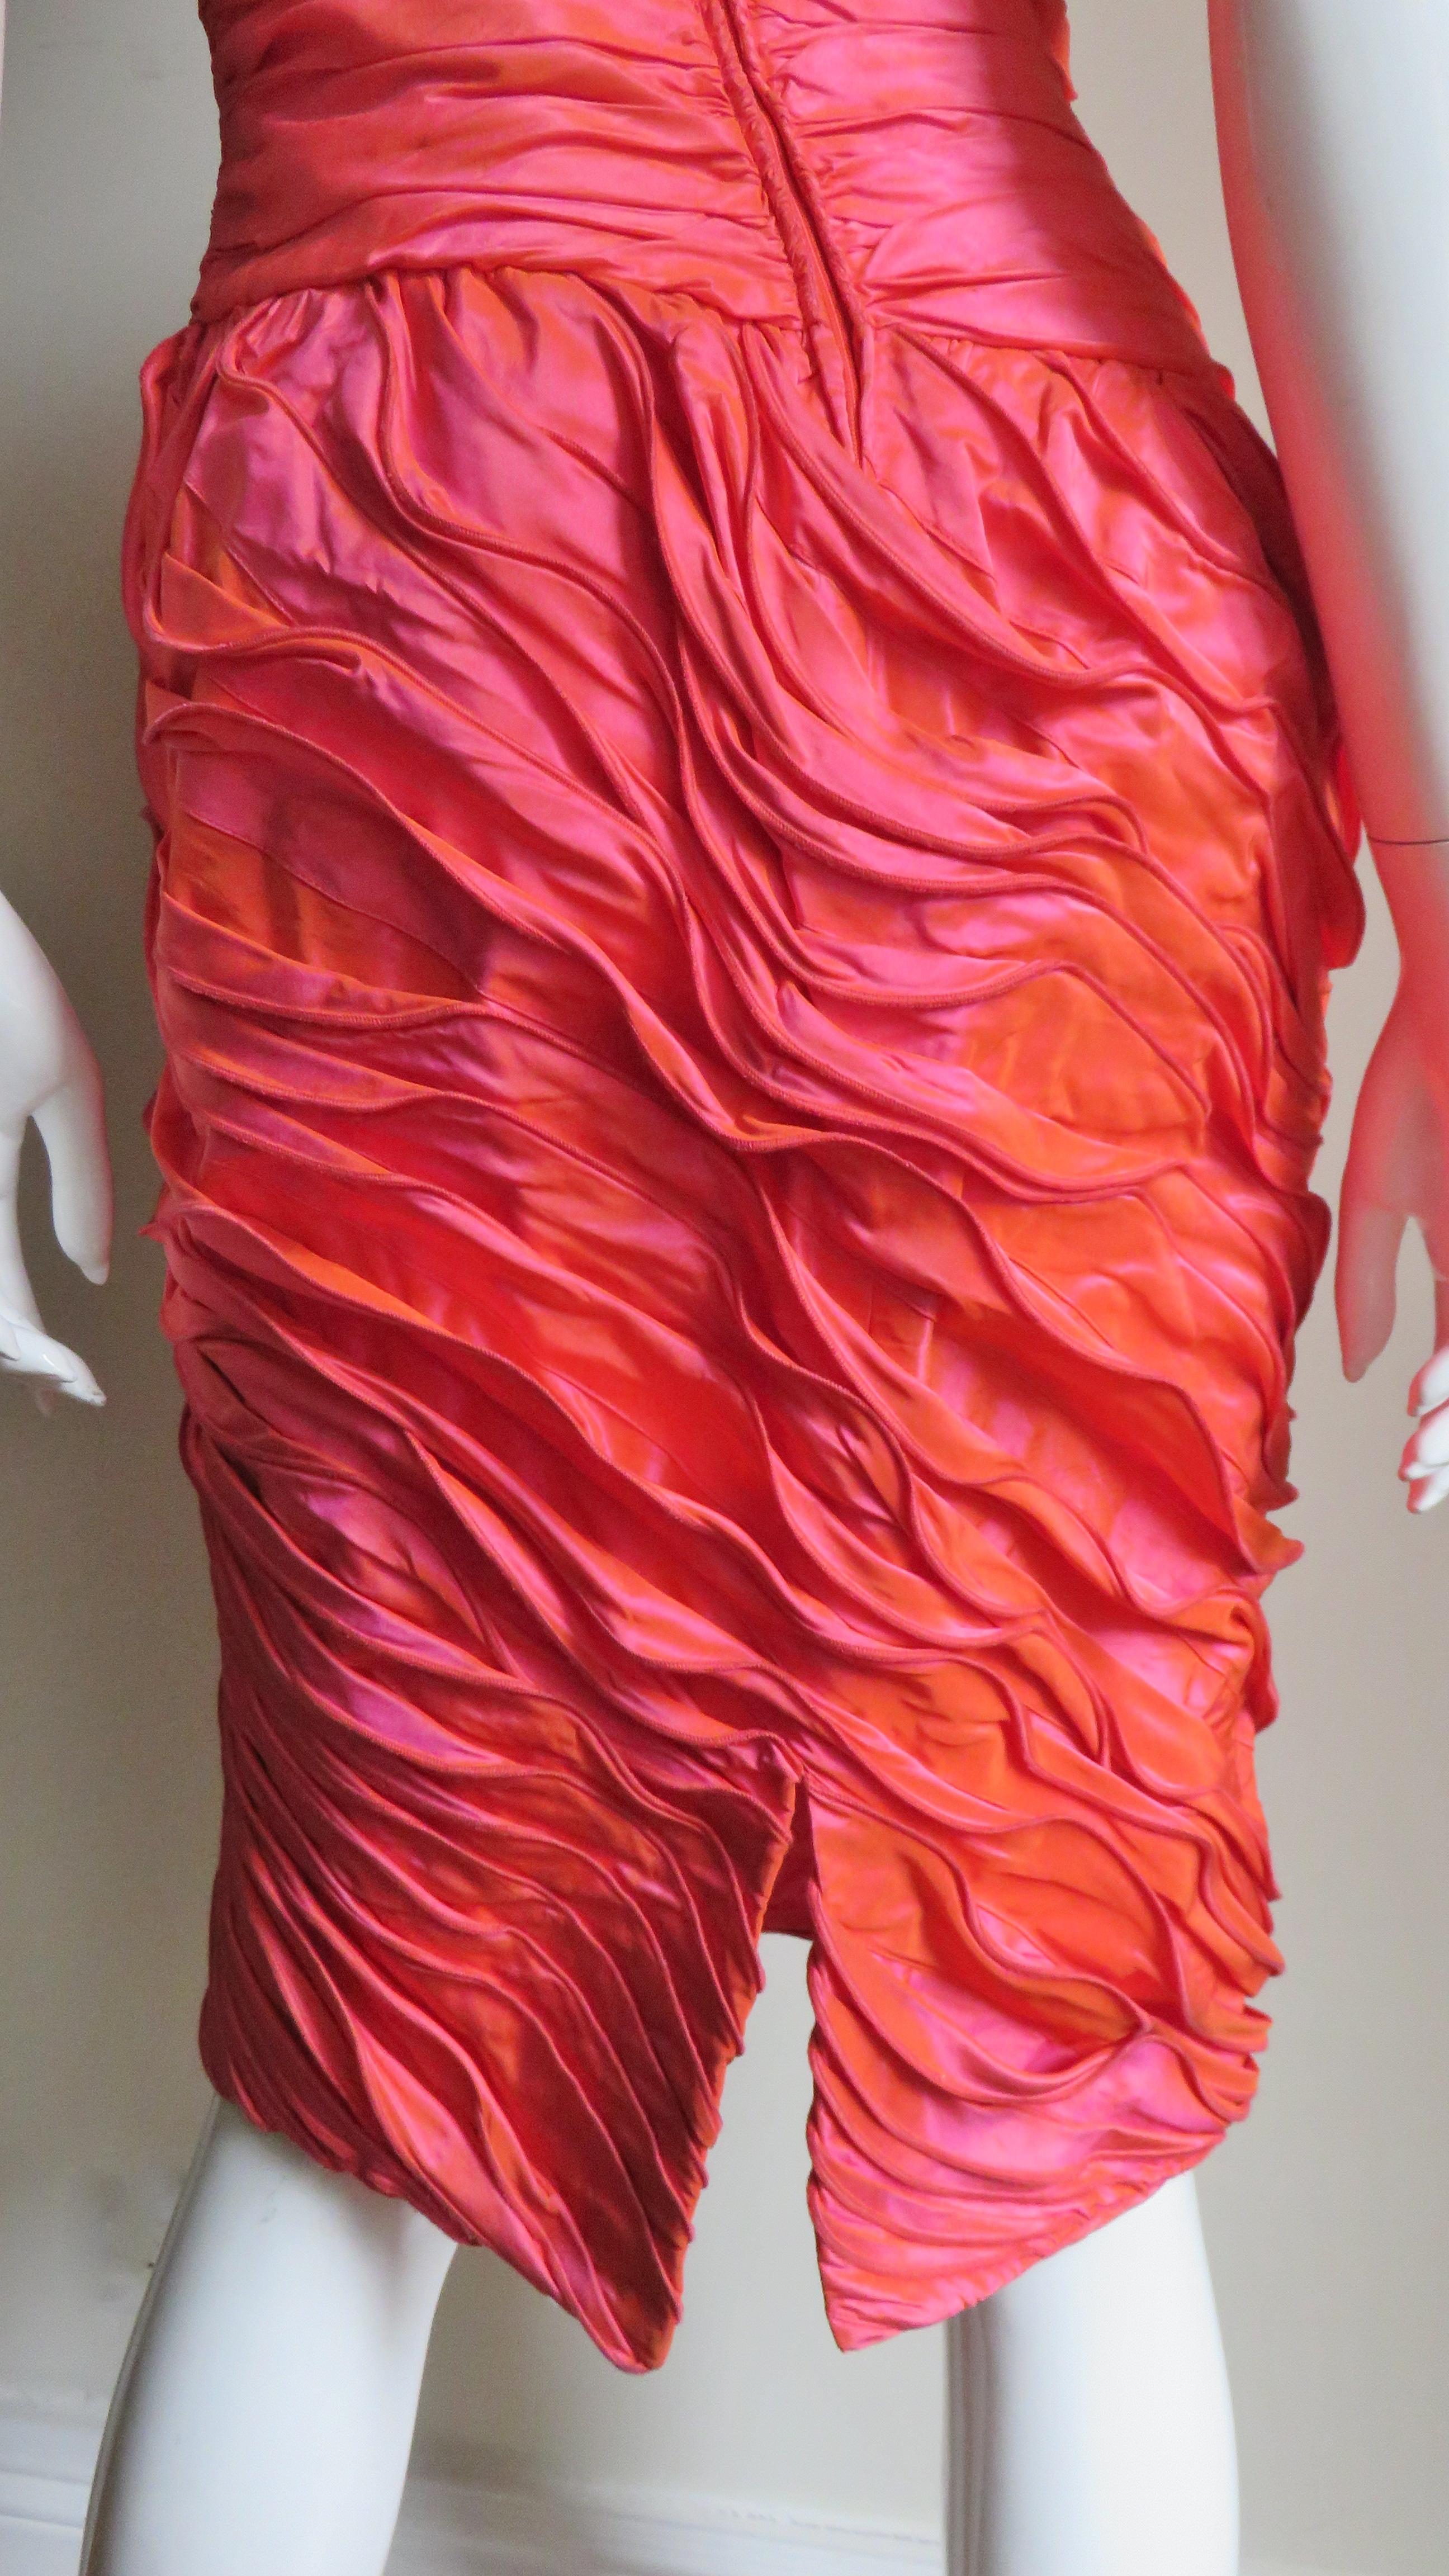 Louis Feraud 1980s Silk Dress with Elaborate Layers  For Sale 6